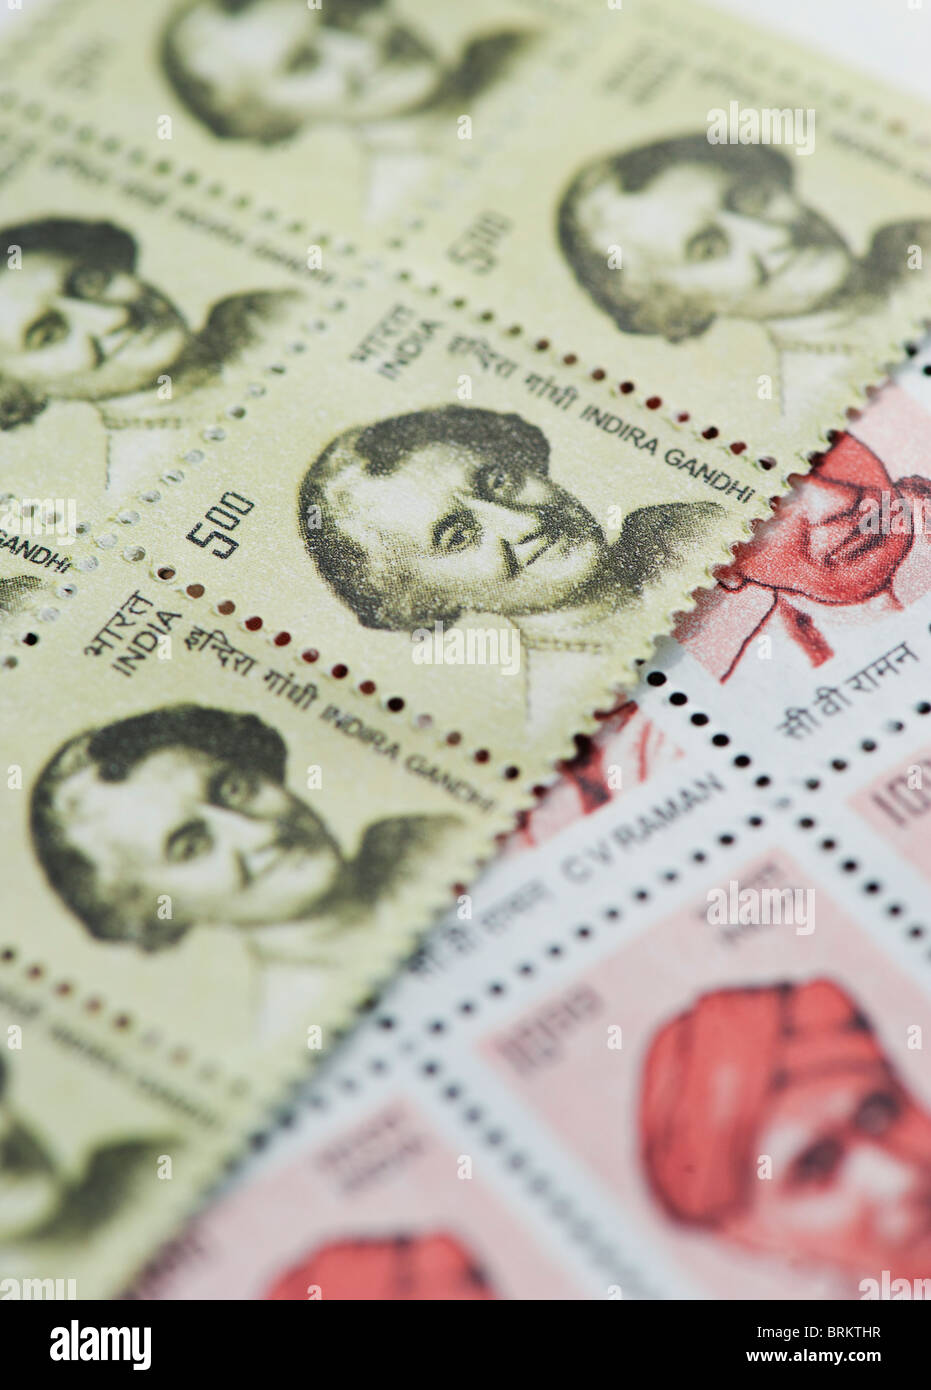 Indian postage stamps. India Stock Photo